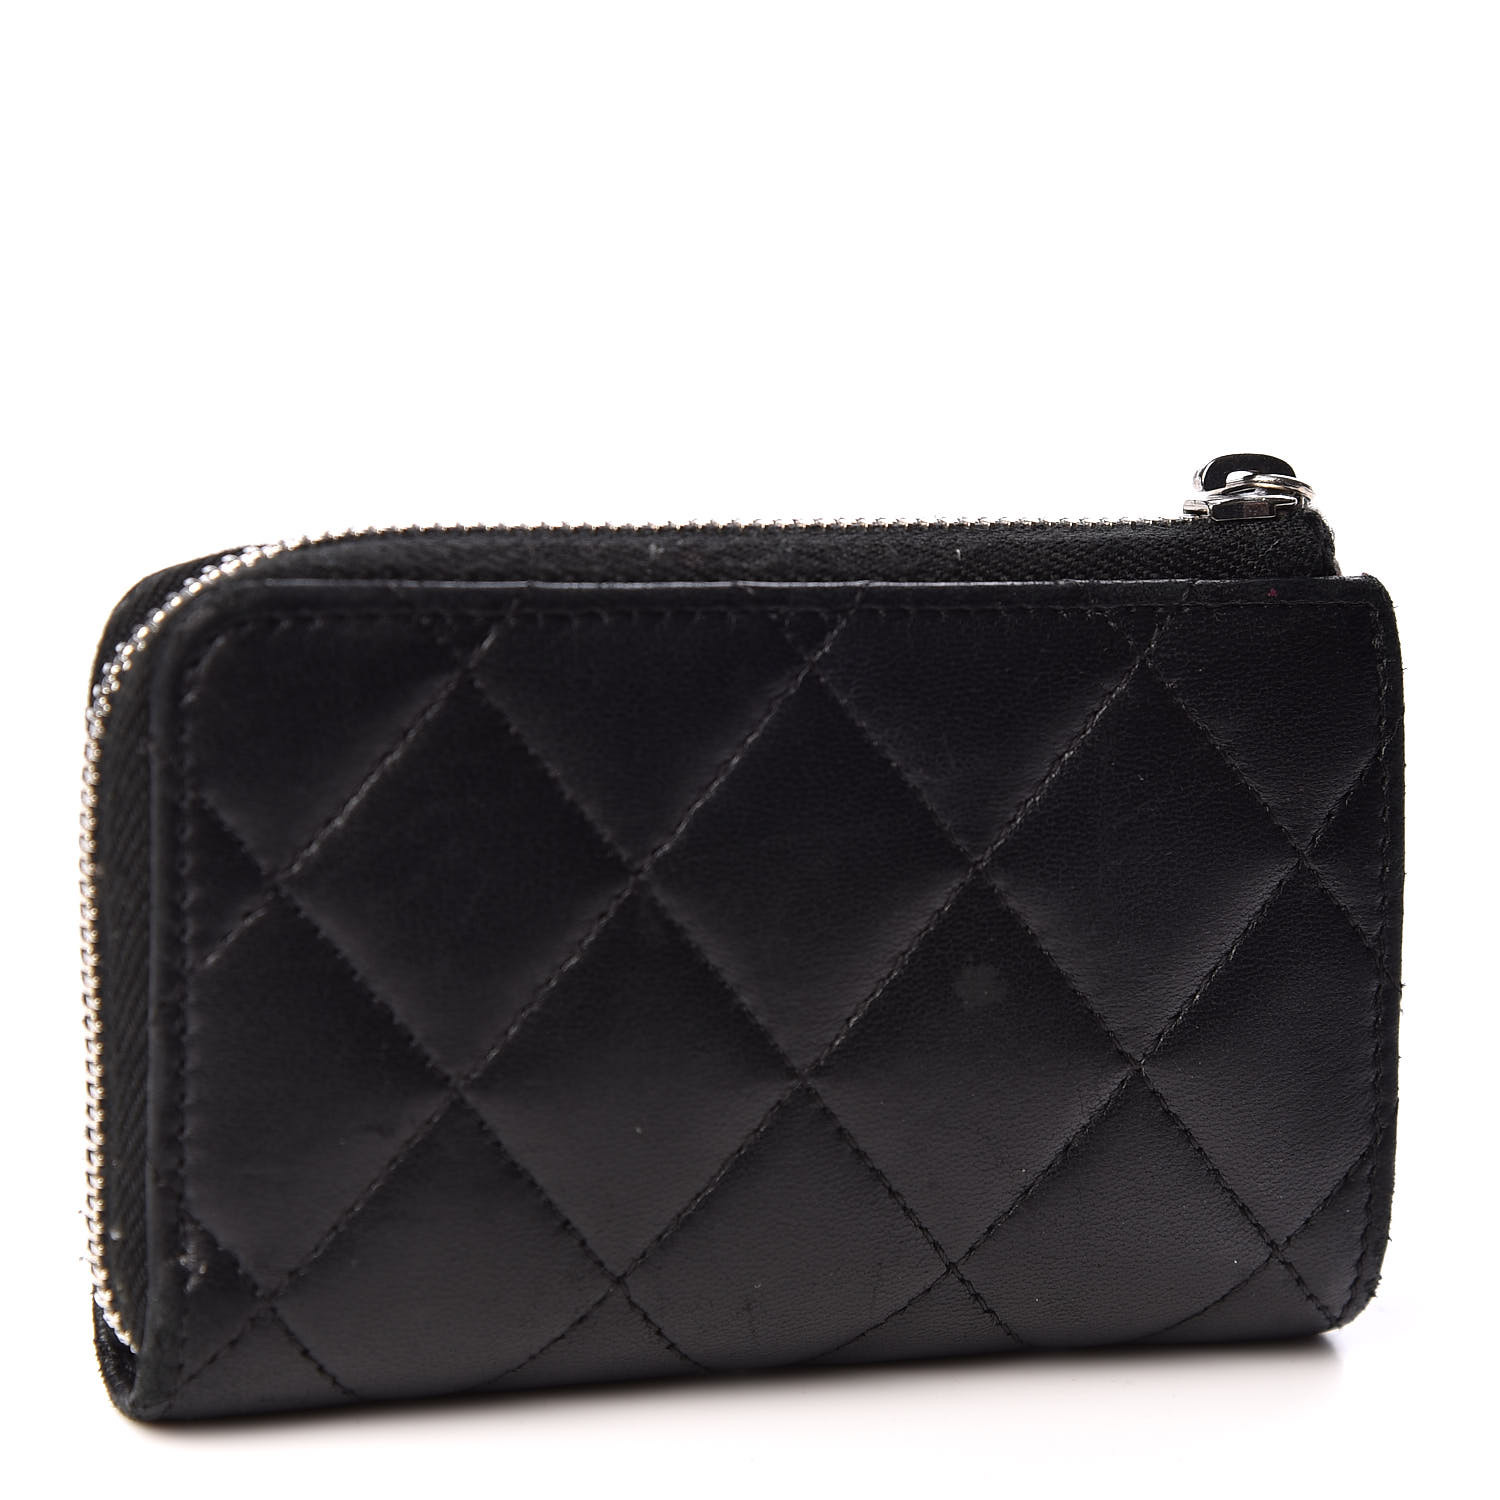 CHANEL Lambskin Quilted Key Holder Case Black 560993